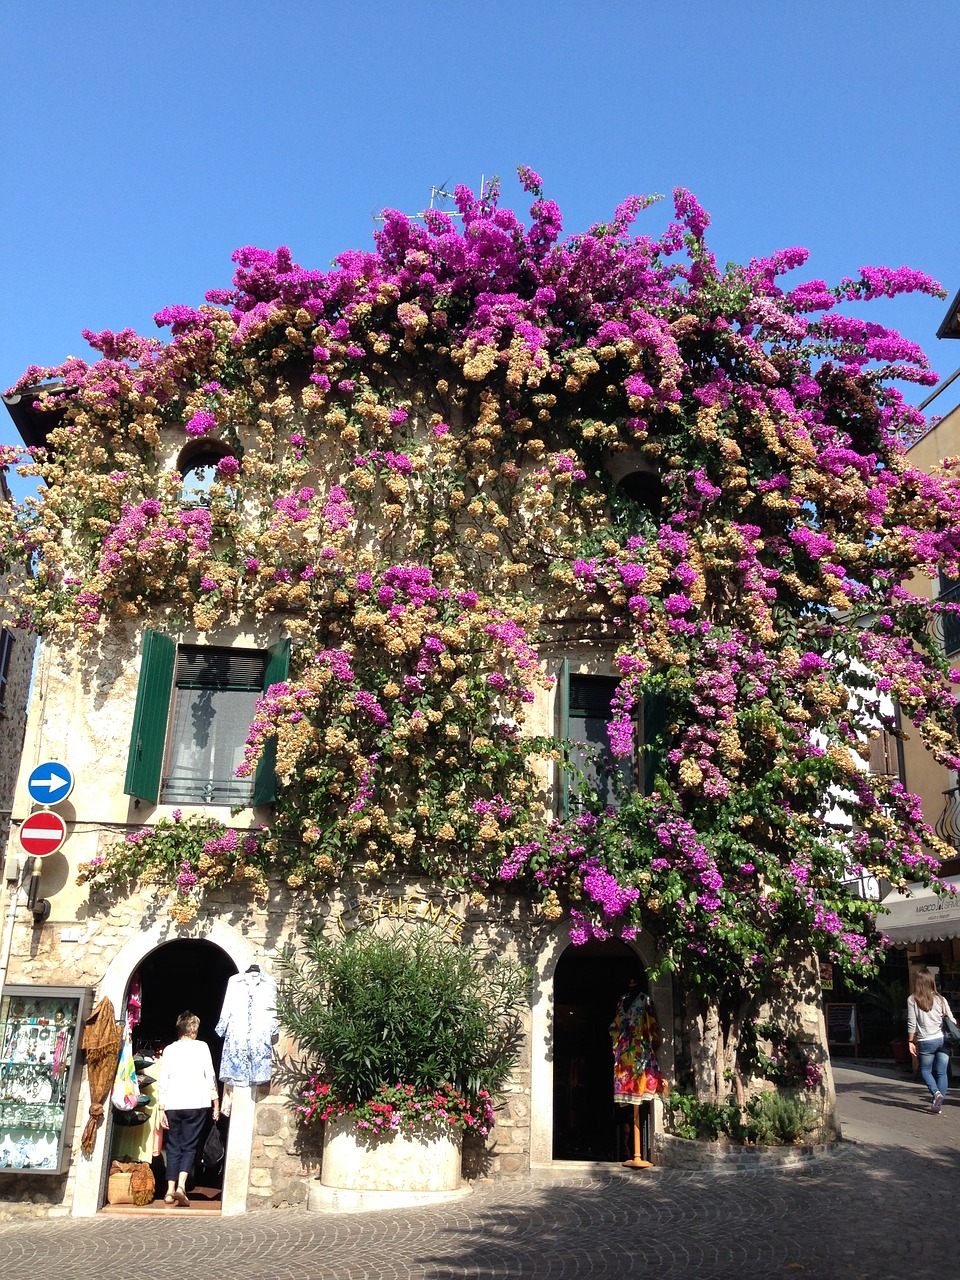 sirmione flowers house free photo